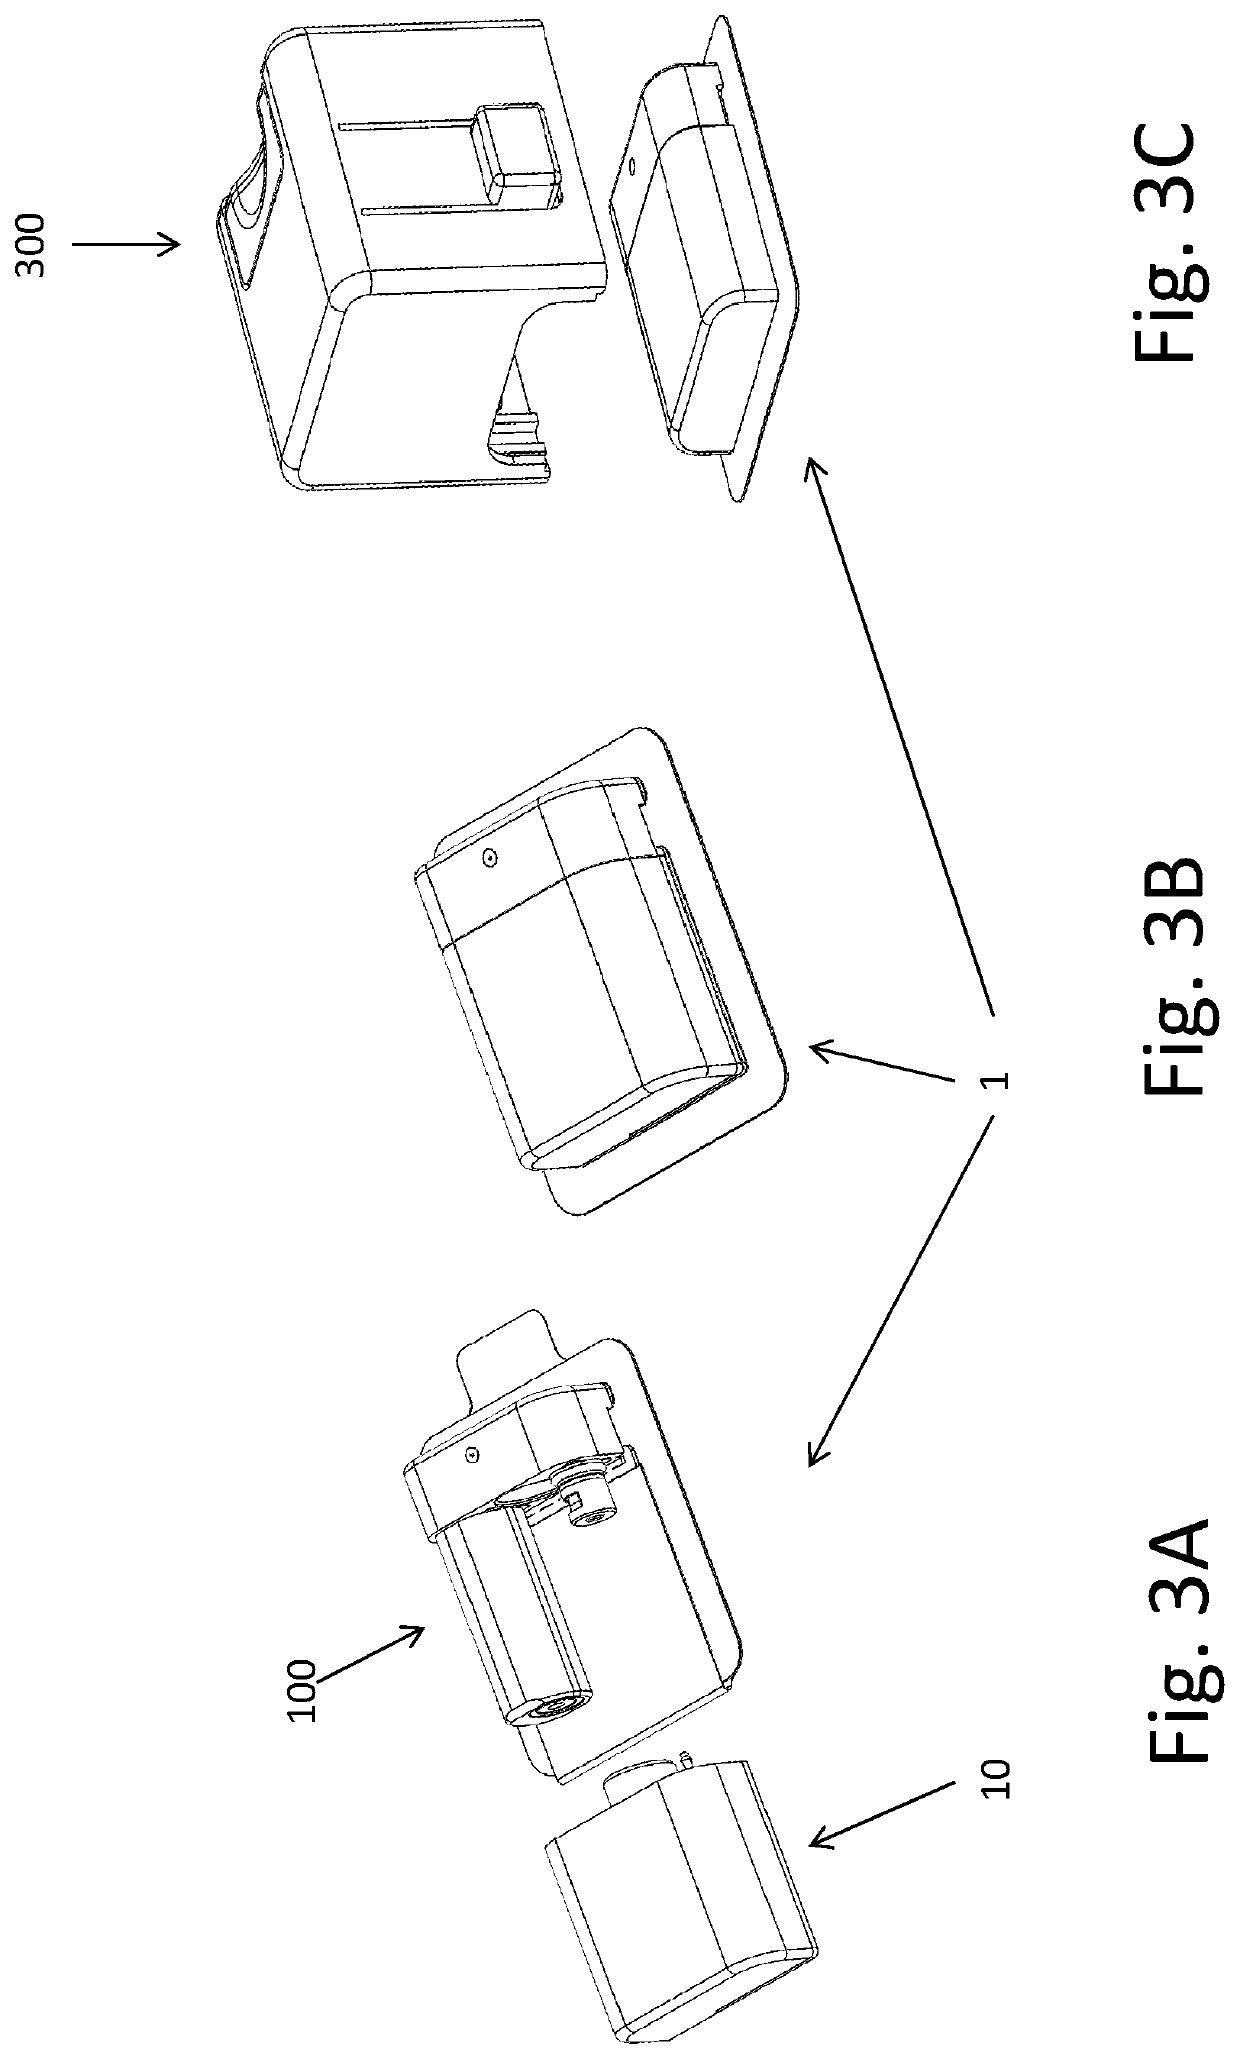 Patch pump systems and apparatus for managing diabetes, and methods thereof